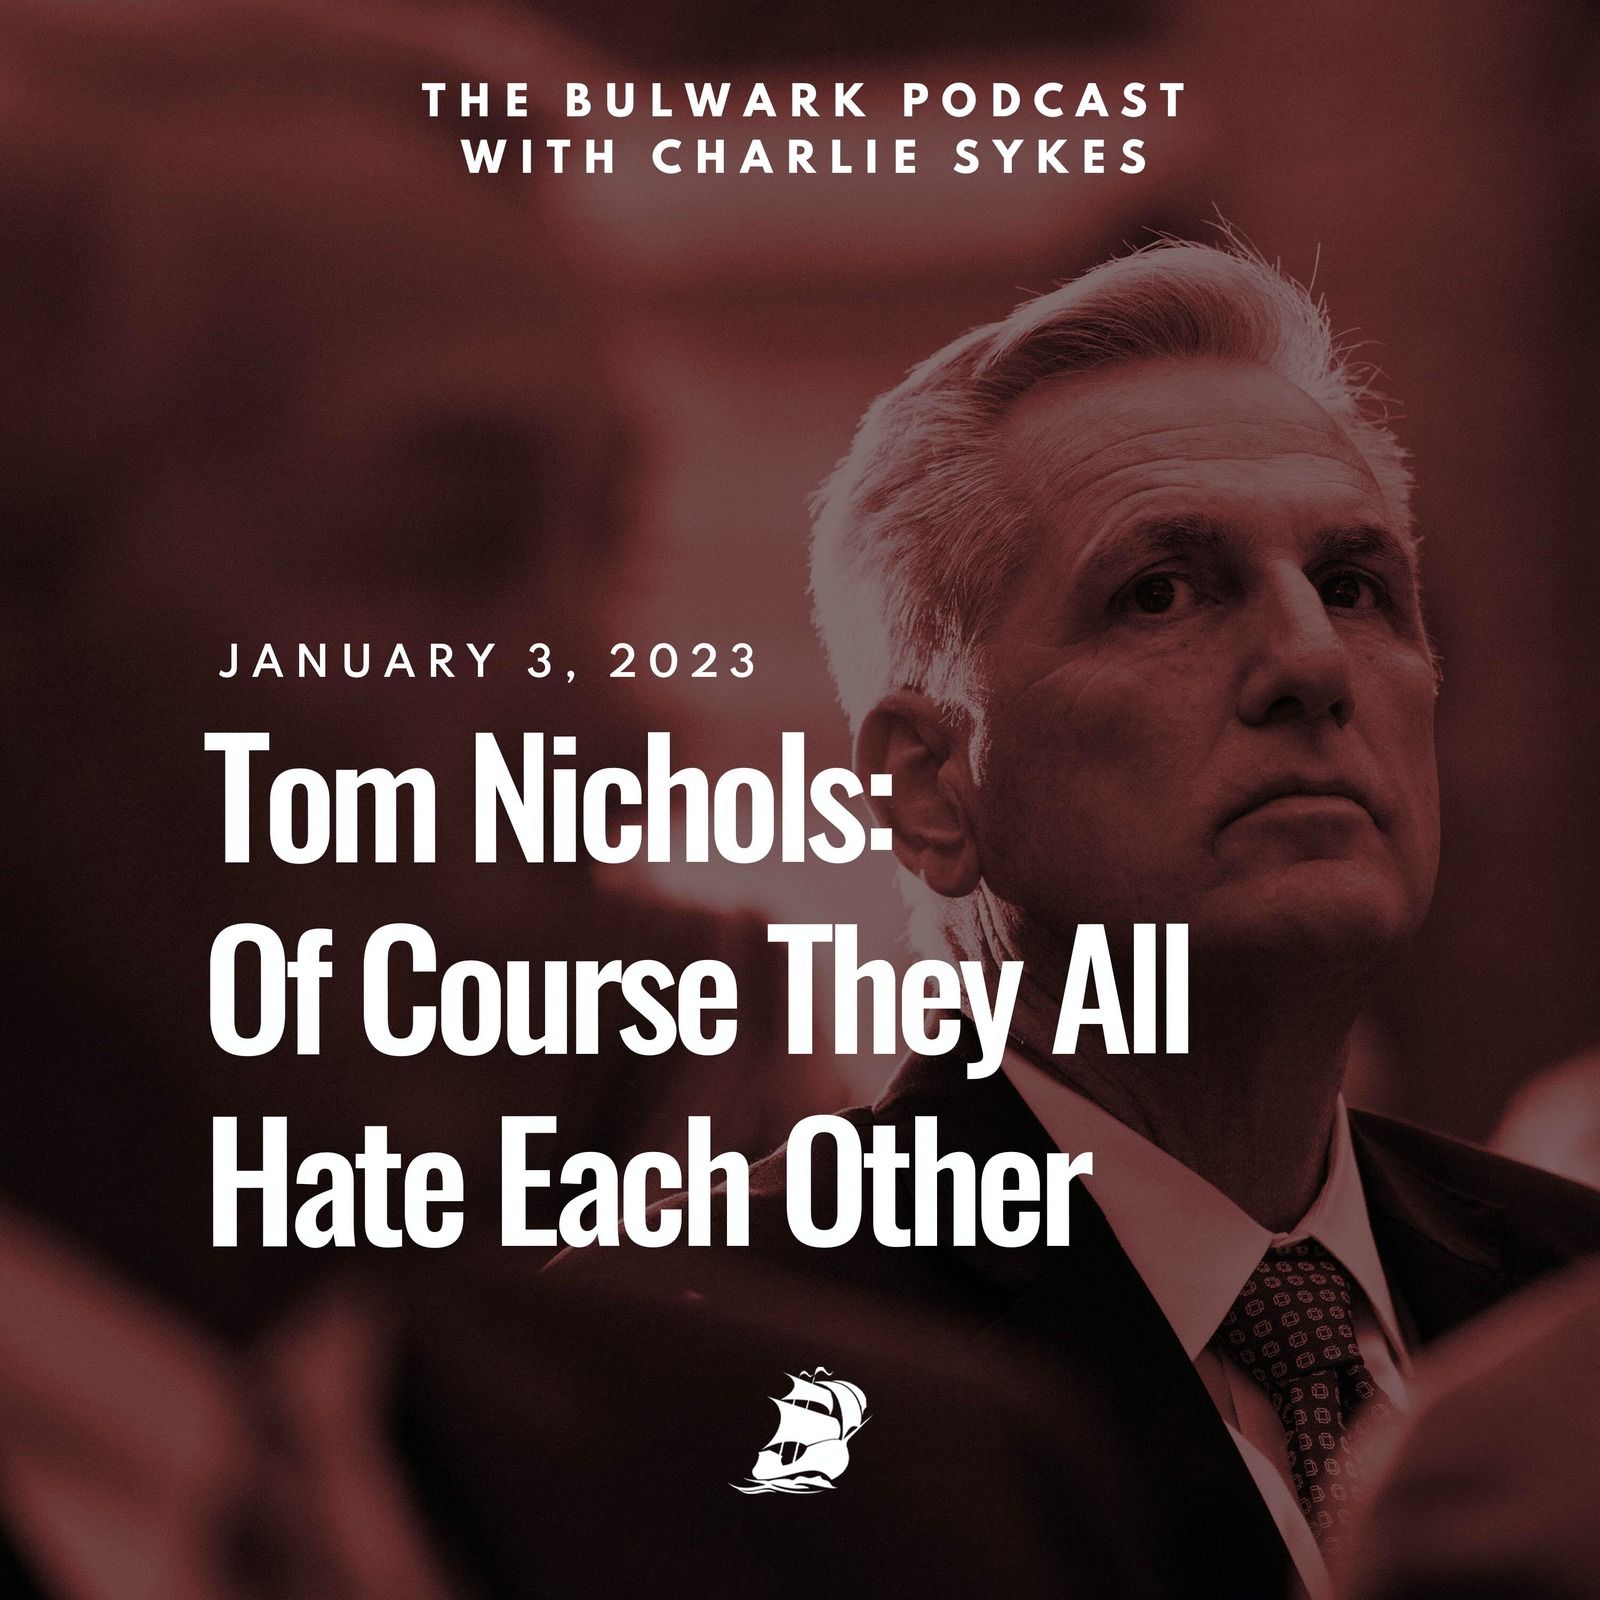 Tom Nichols: Of Course They All Hate Each Other by The Bulwark Podcast